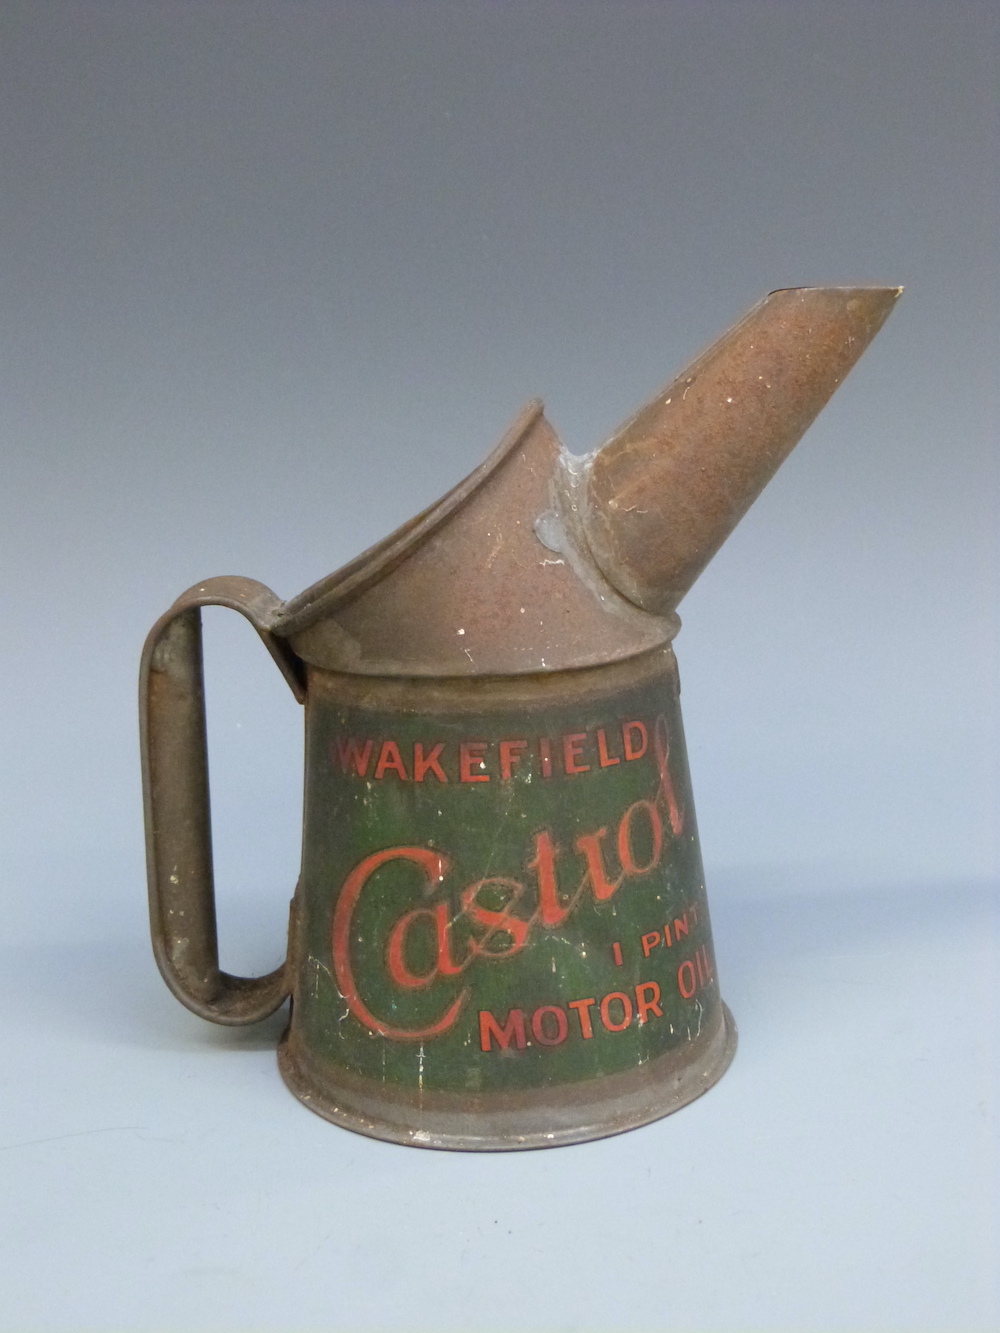 Wakefield Castrol Vintage Oil Can. Sold For £120